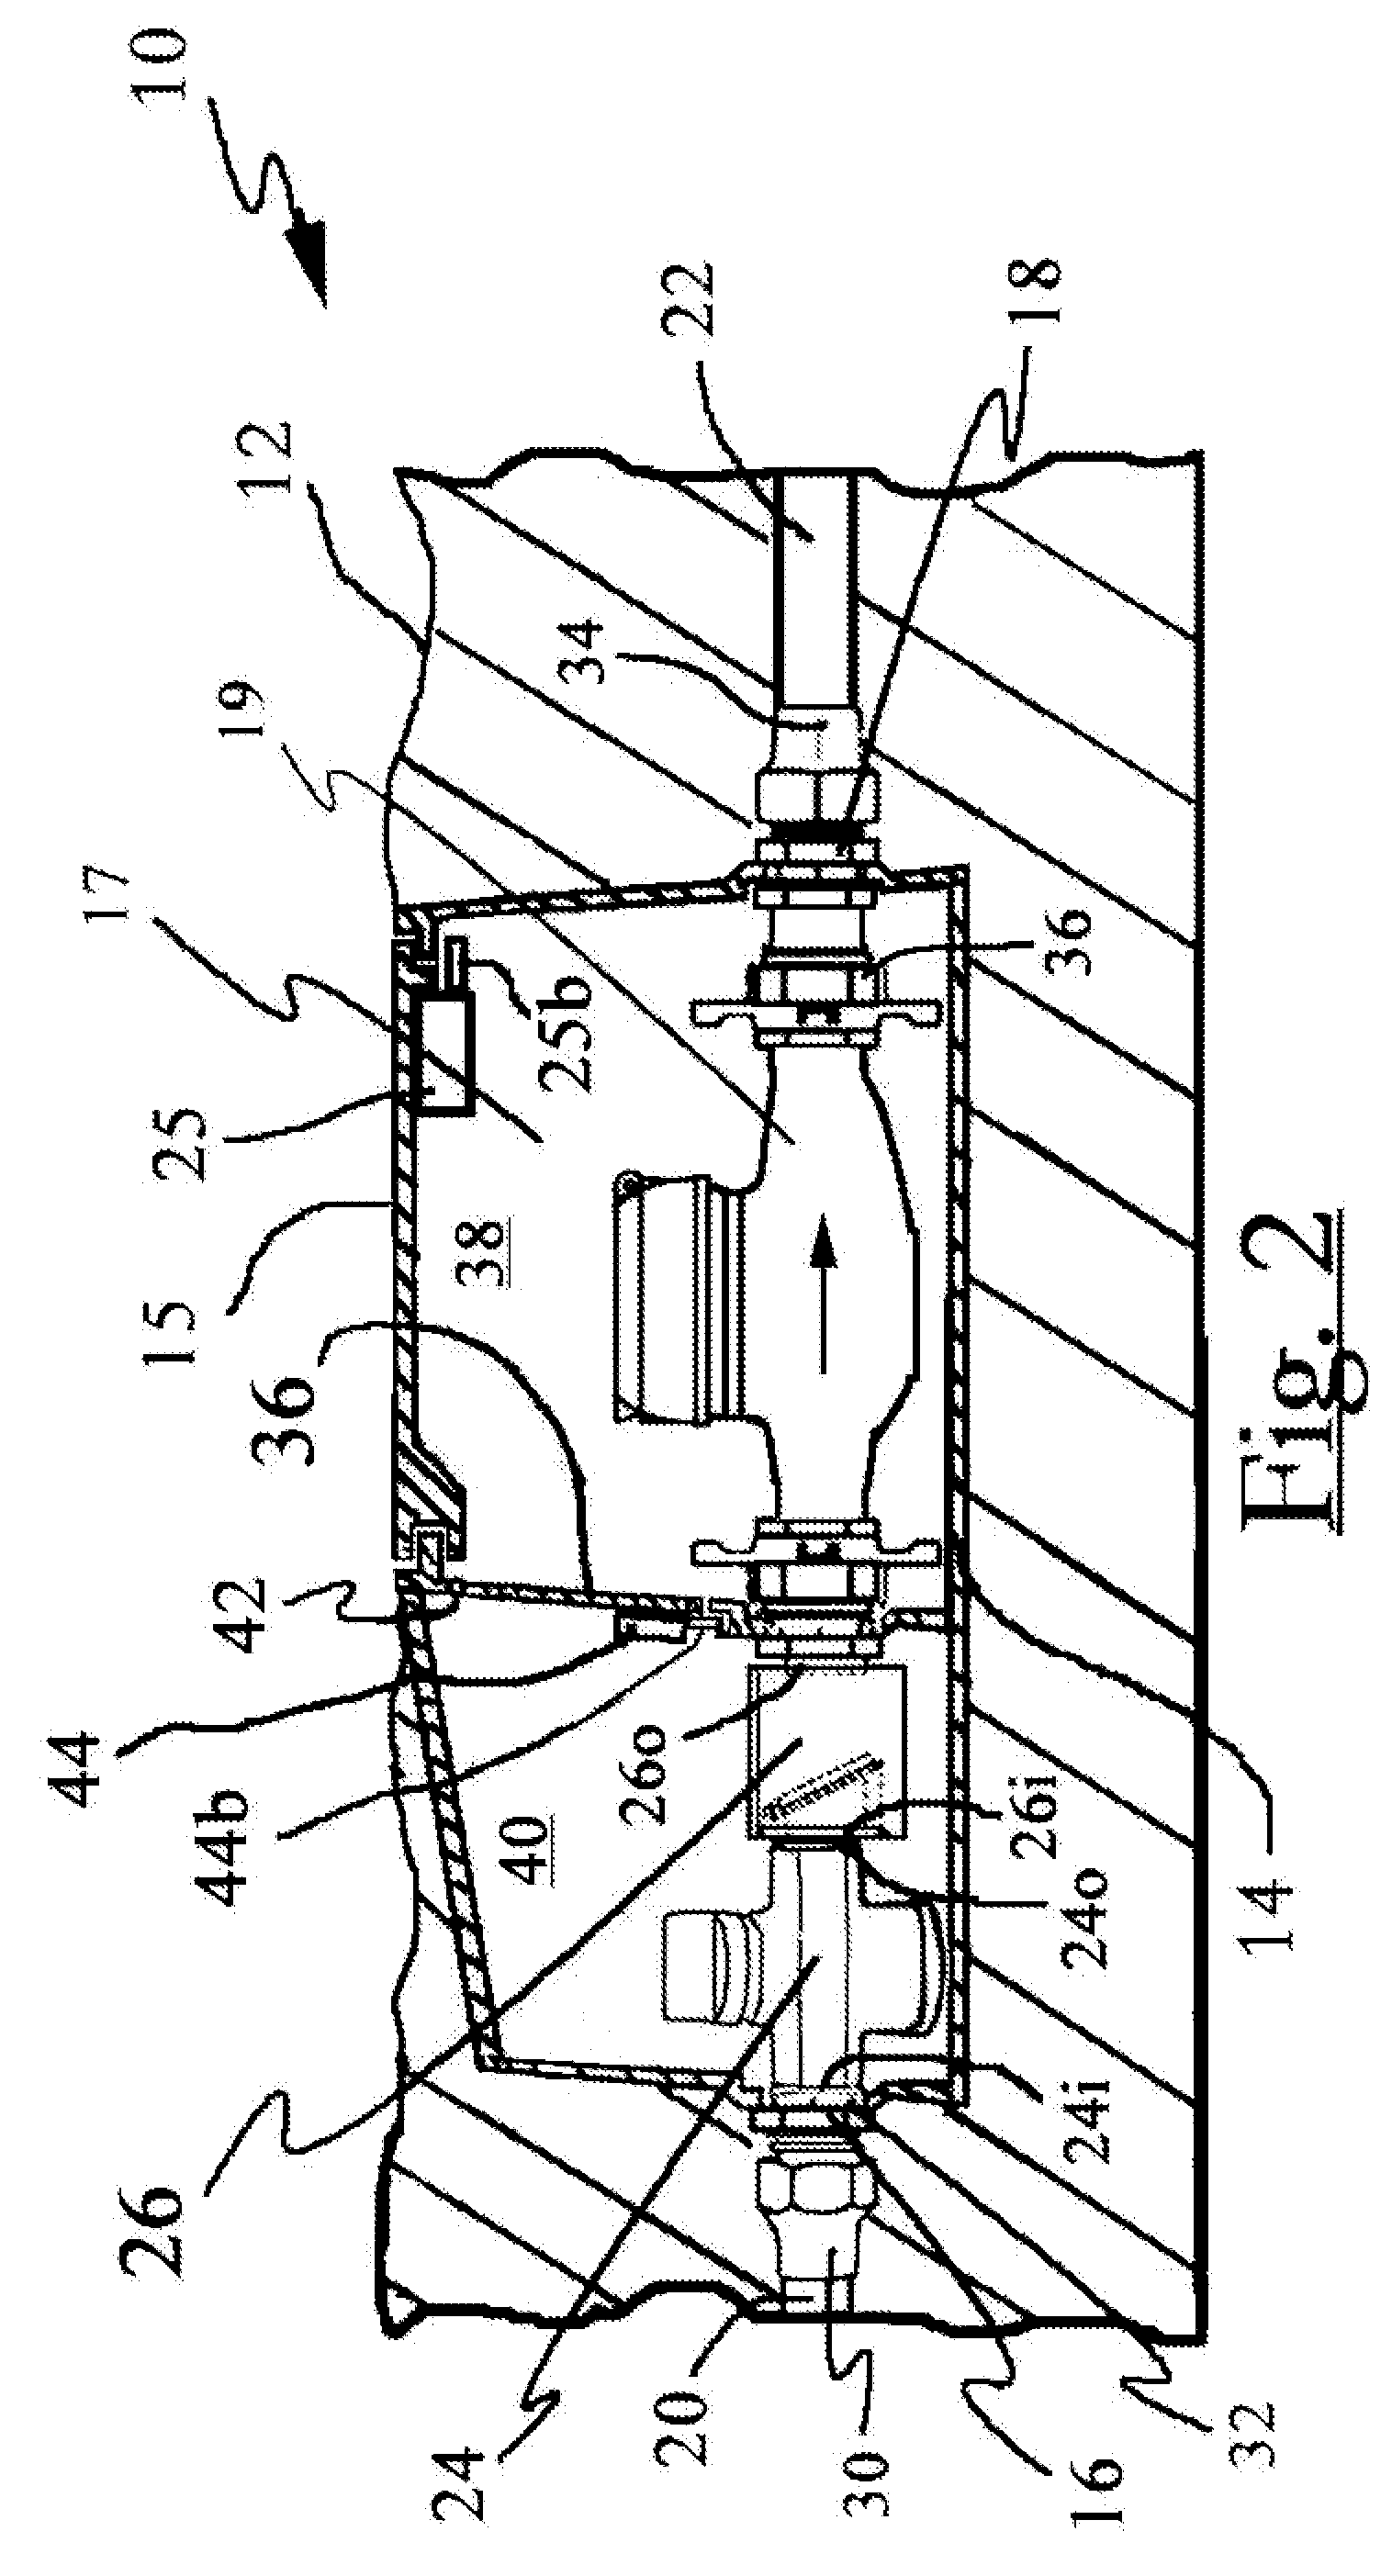 Method of associating a water utility service line to a customer service line